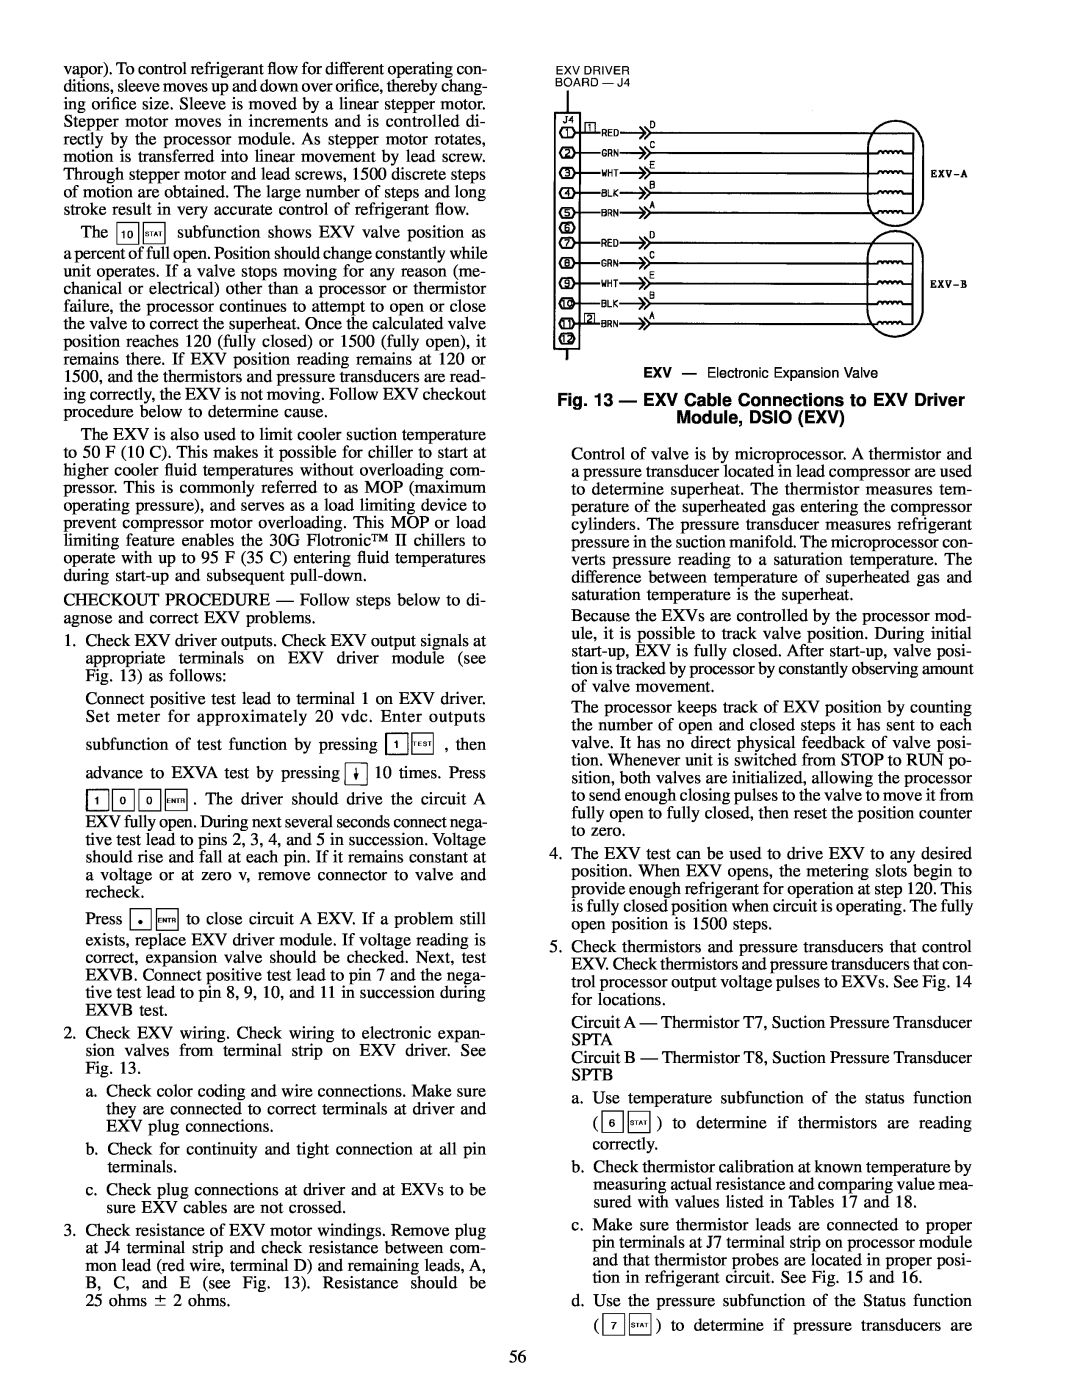 Carrier 30GN040-420 operating instructions Ð EXV Cable Connections to EXV Driver, Module, DSIO EXV 